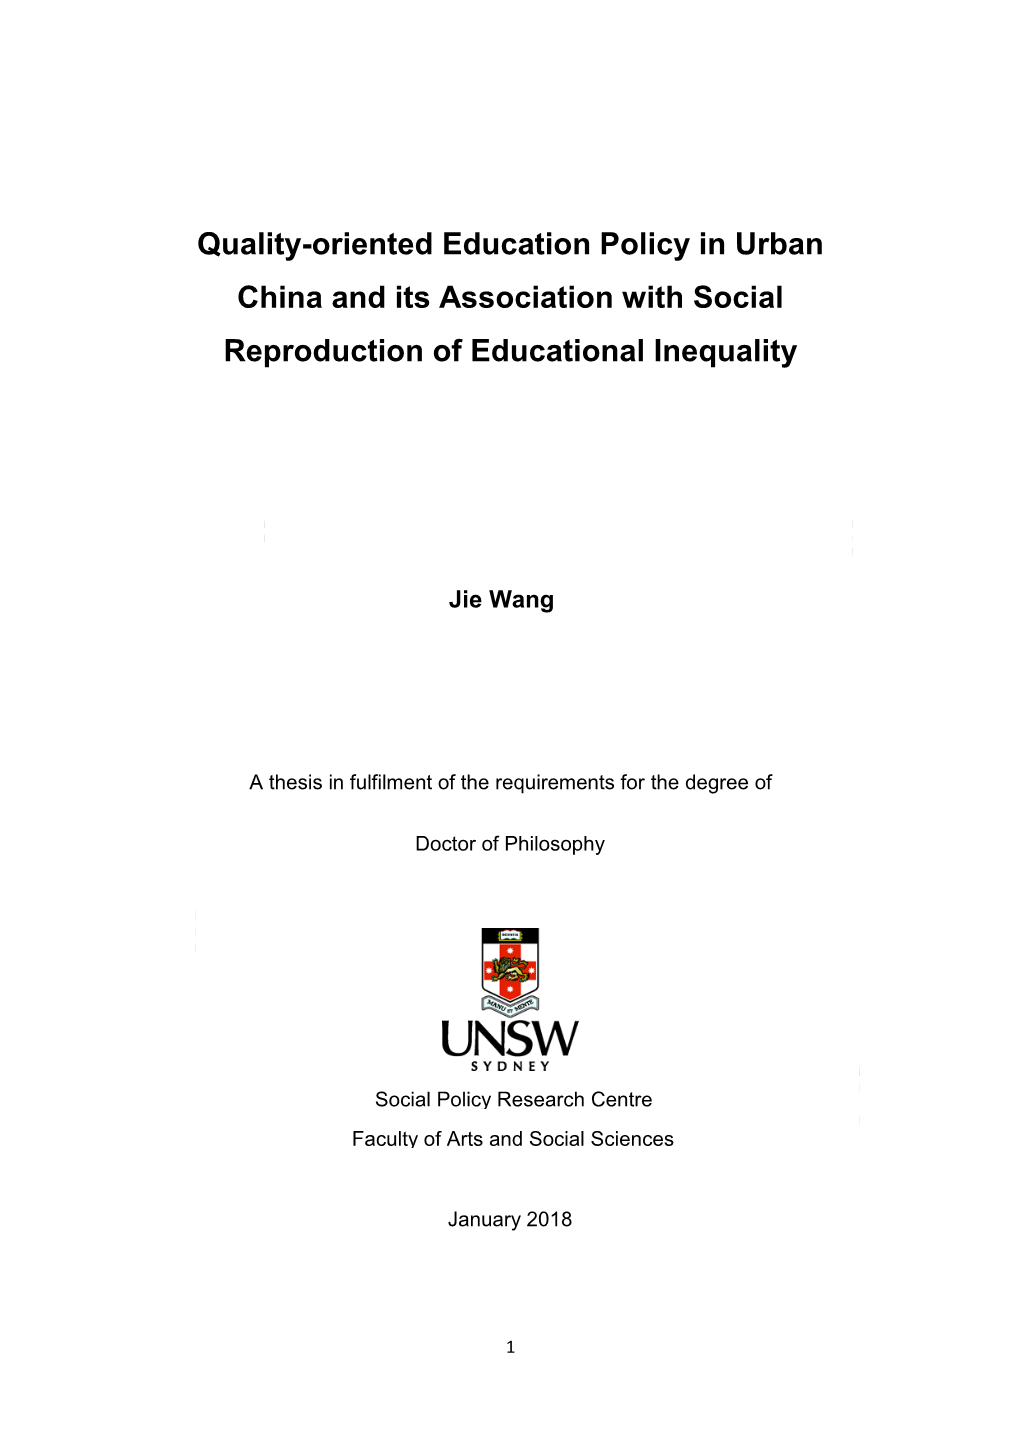 Quality-Oriented Education Policy in Urban China and Its Association with Social Reproduction of Educational Inequality